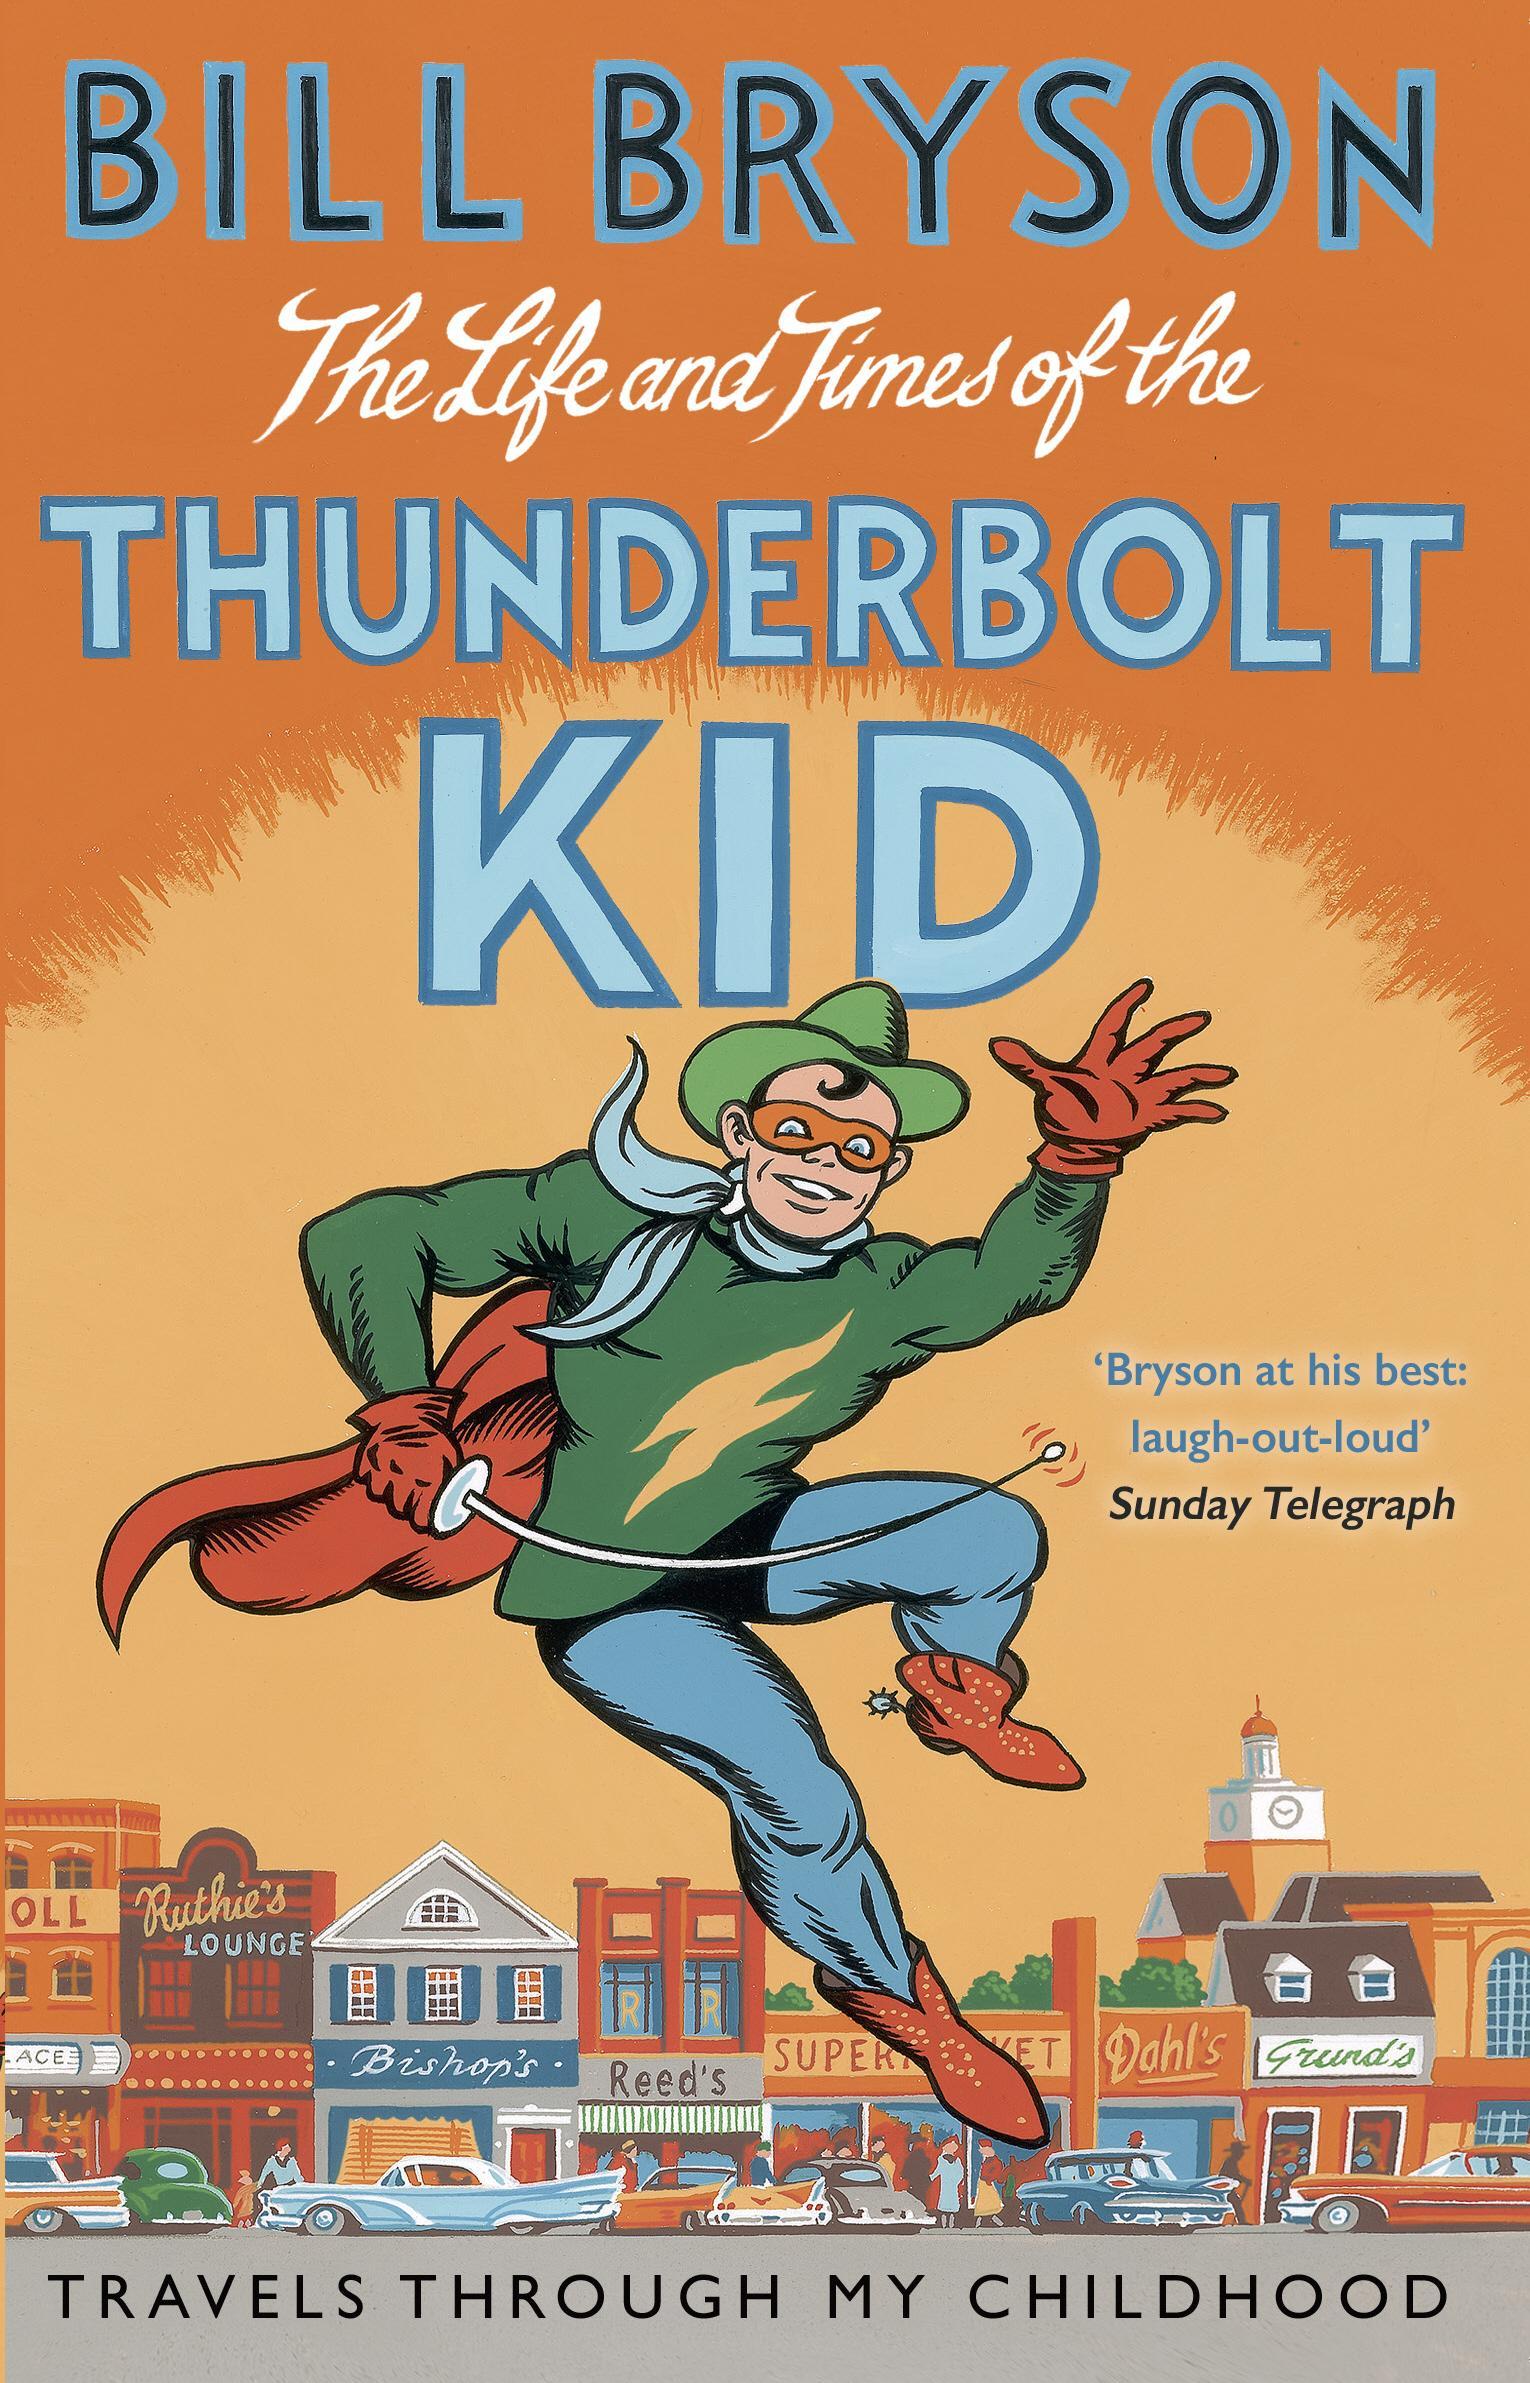 Life And Times Of The Thunderbolt Kid - Bill Bryson